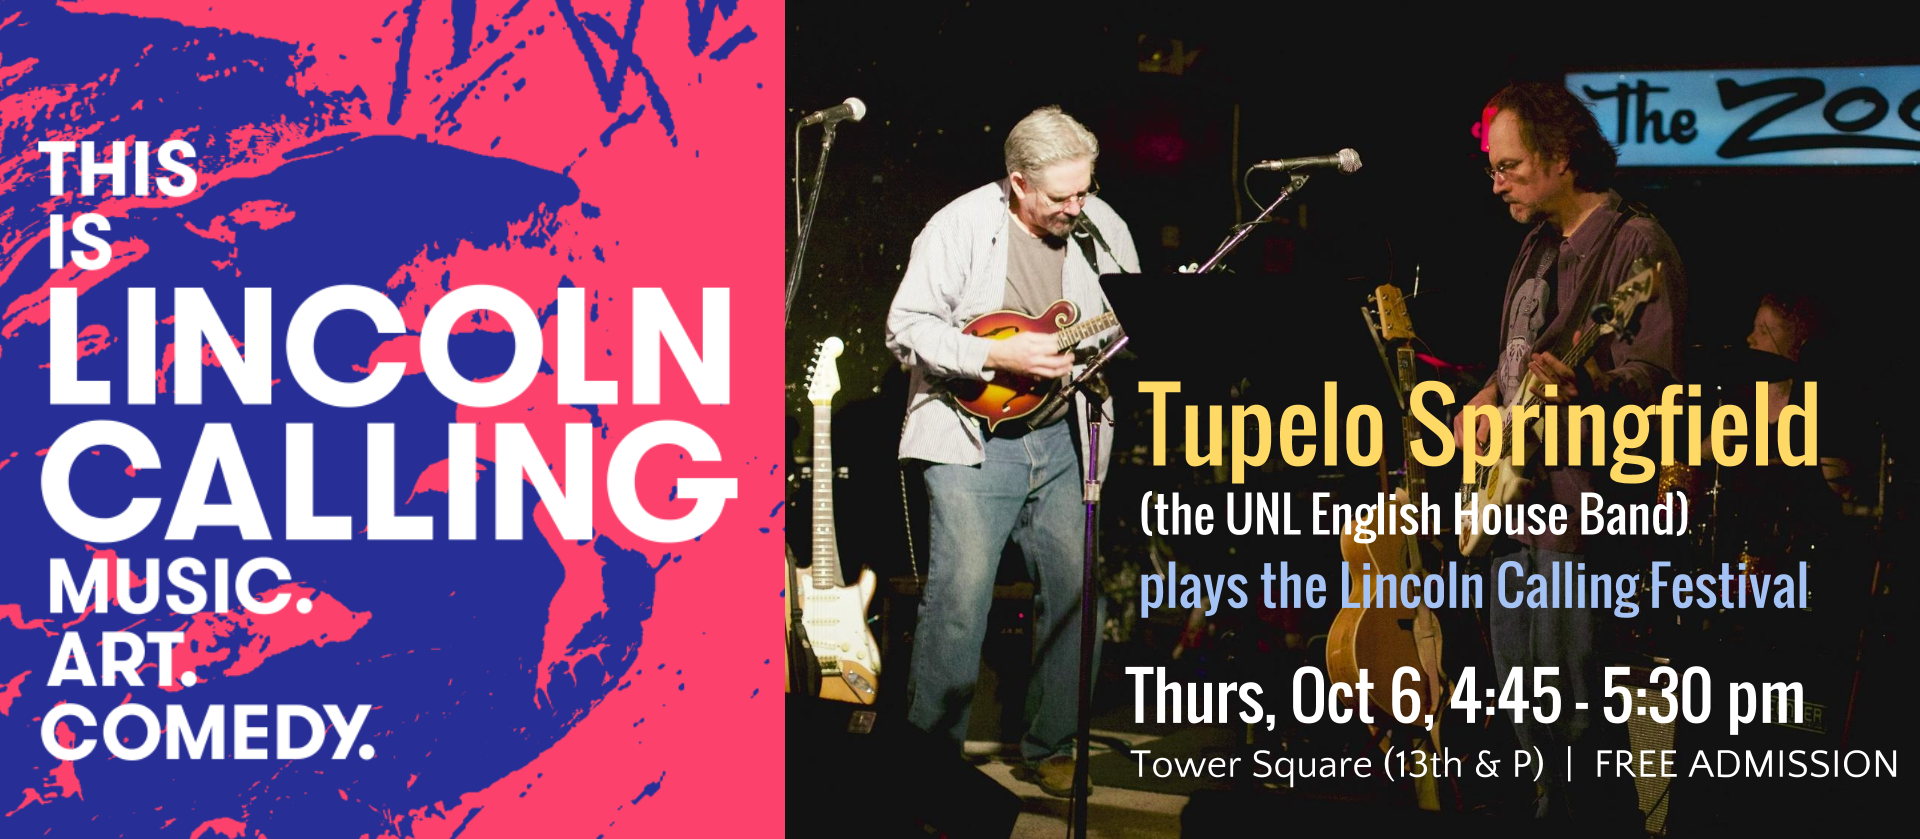 Poster for Tupelo Springfield's Lincoln Calling performance